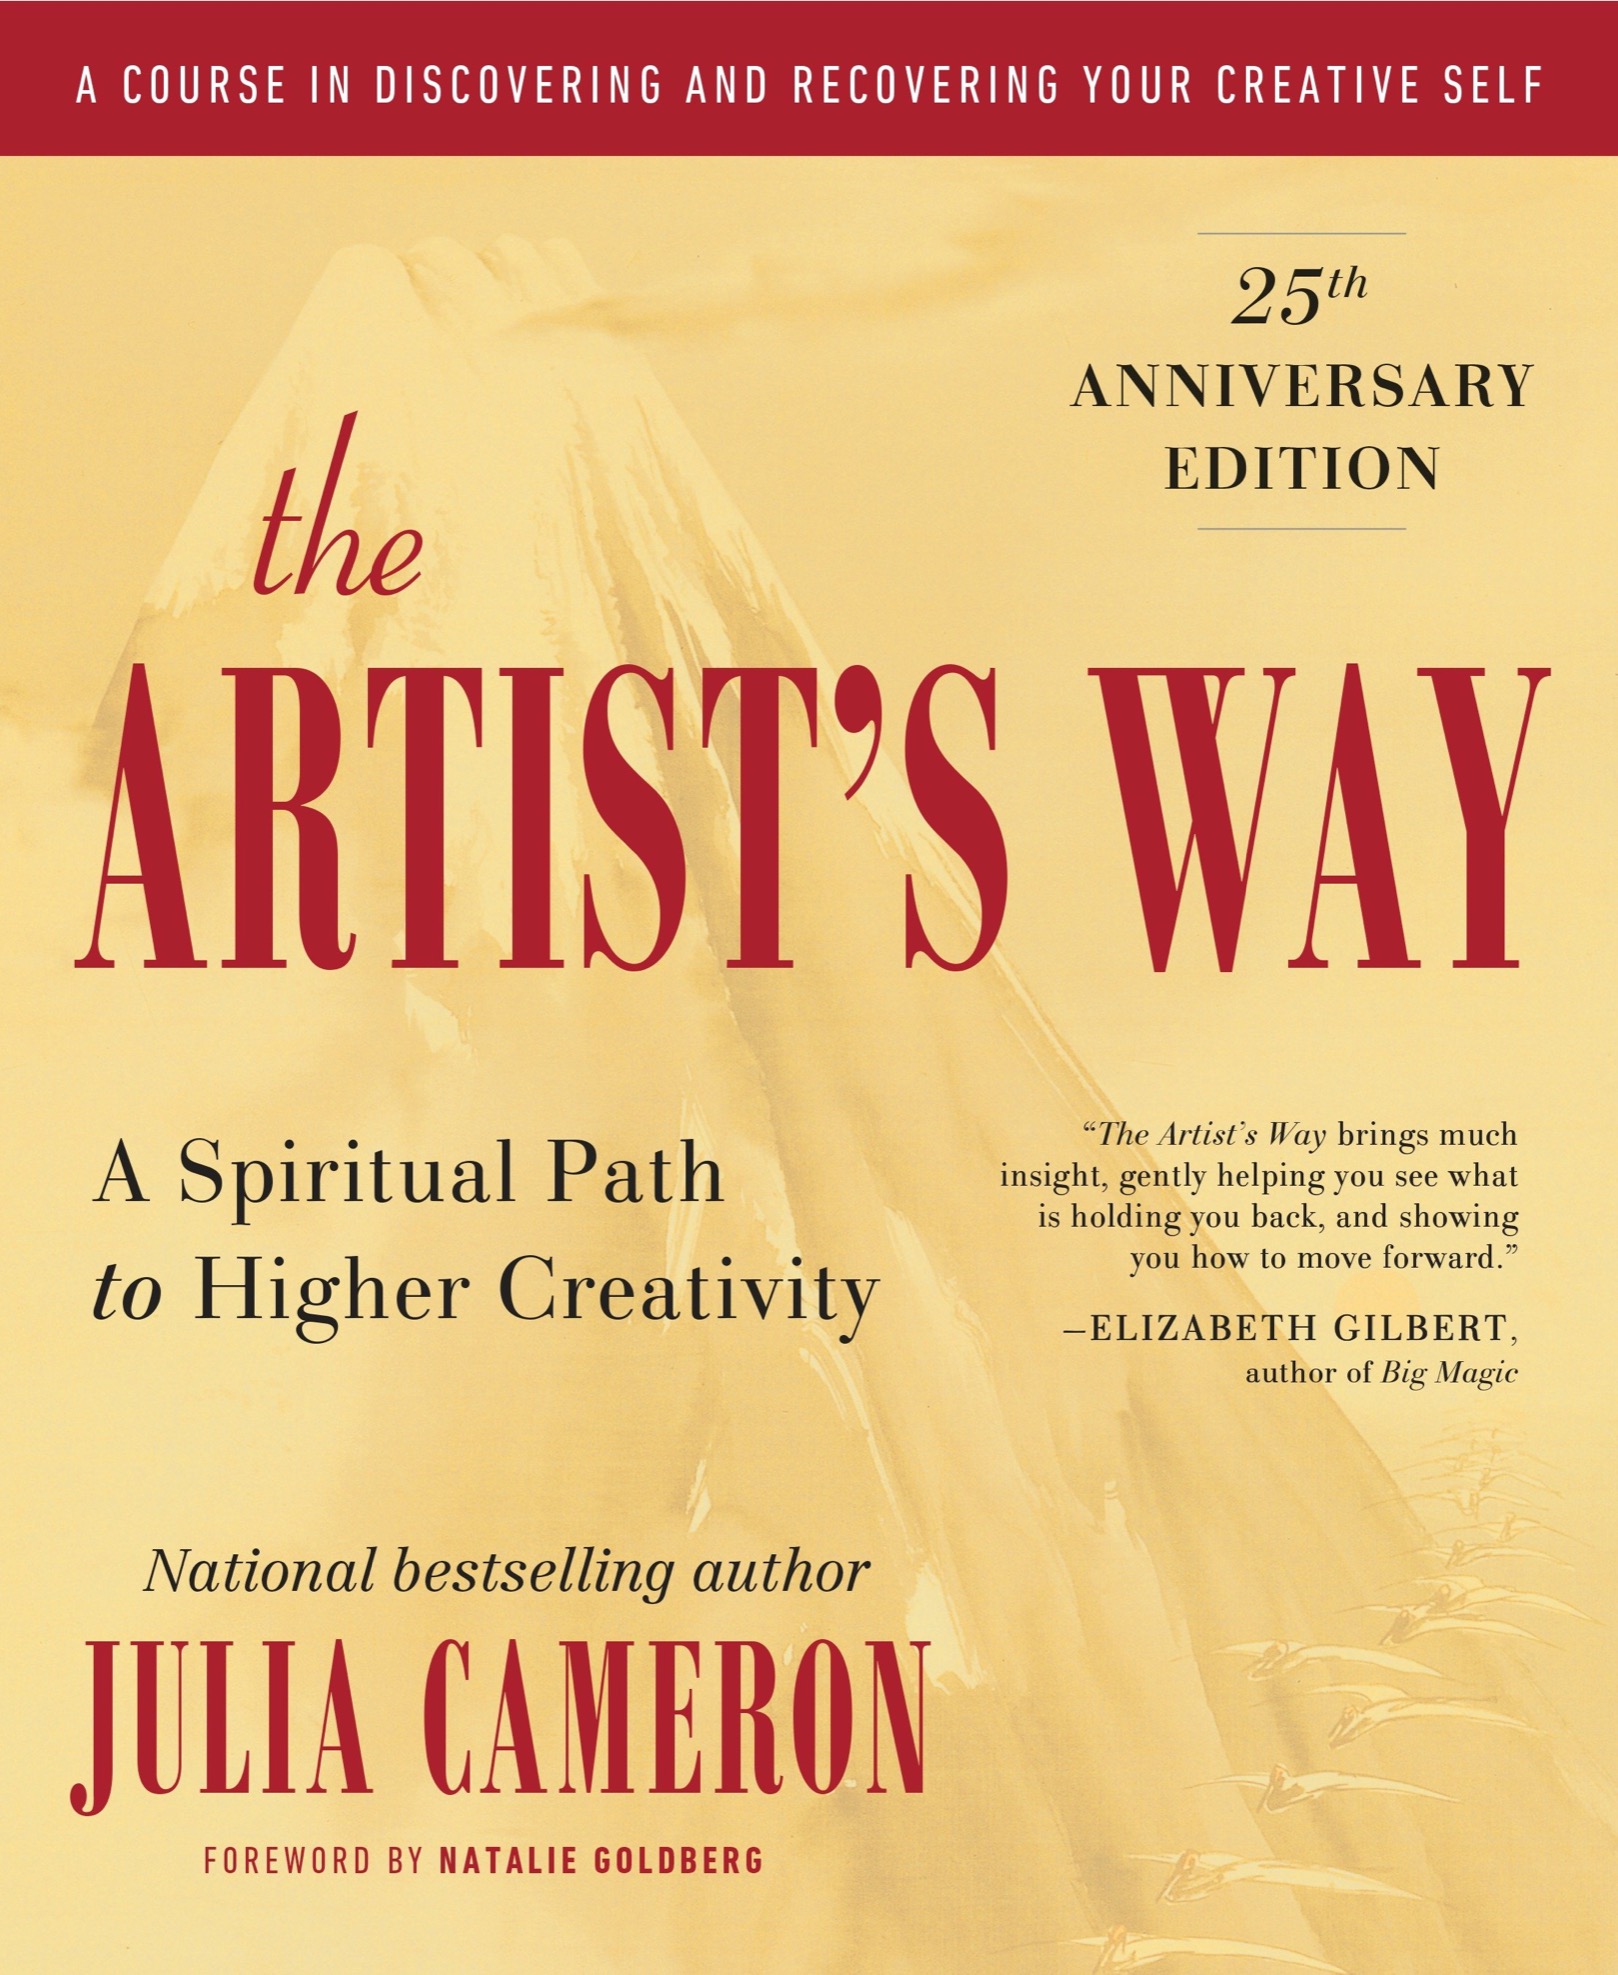 A LSO BY J ULIA C AMERON BOOKS IN THE ARTISTS WAY SERIES Its Never Too Late - photo 1